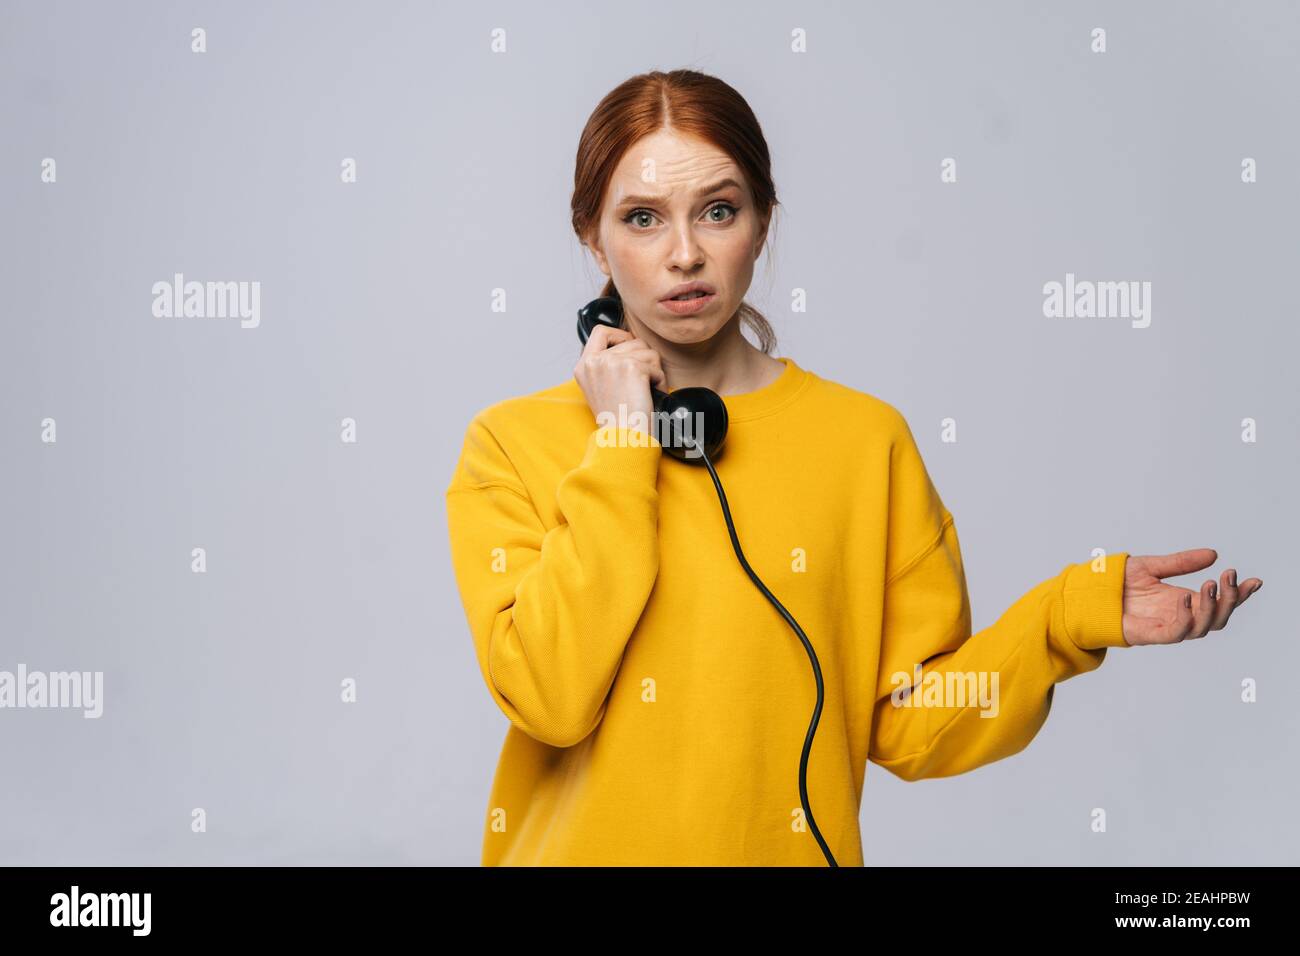 Disappointed sad young woman in stylish yellow sweater talking on retro phone and looking at camera Stock Photo